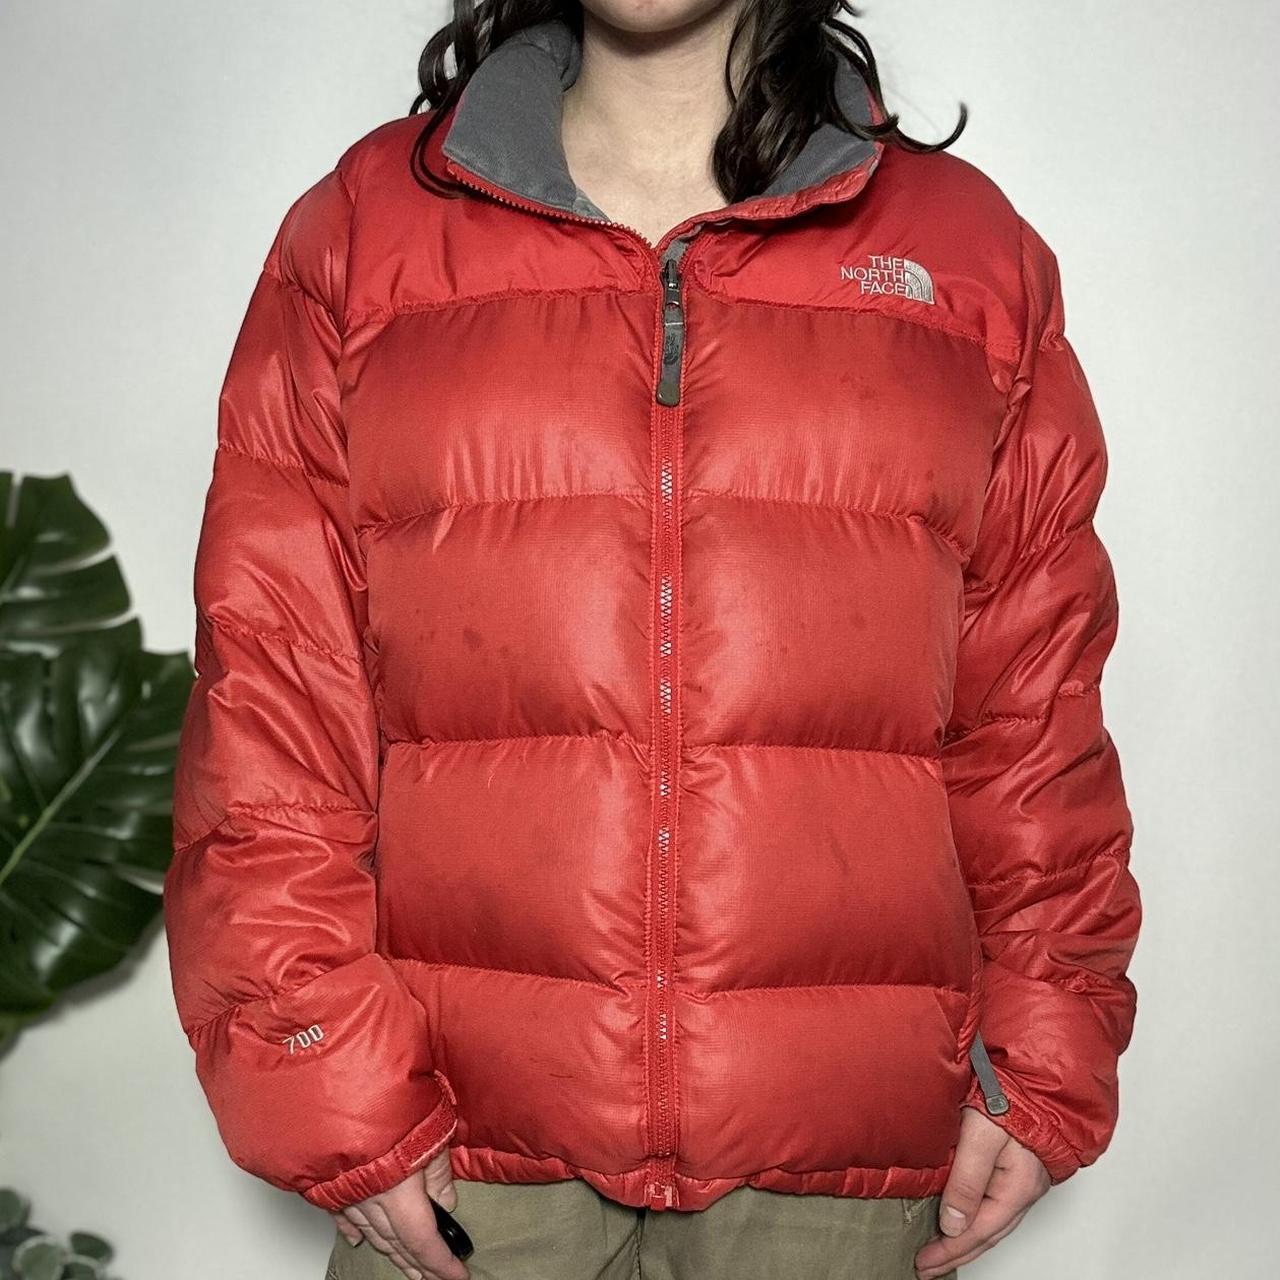 Vintage 90s The North Face 1996 Retro Nuptse 700 red puffer jacket